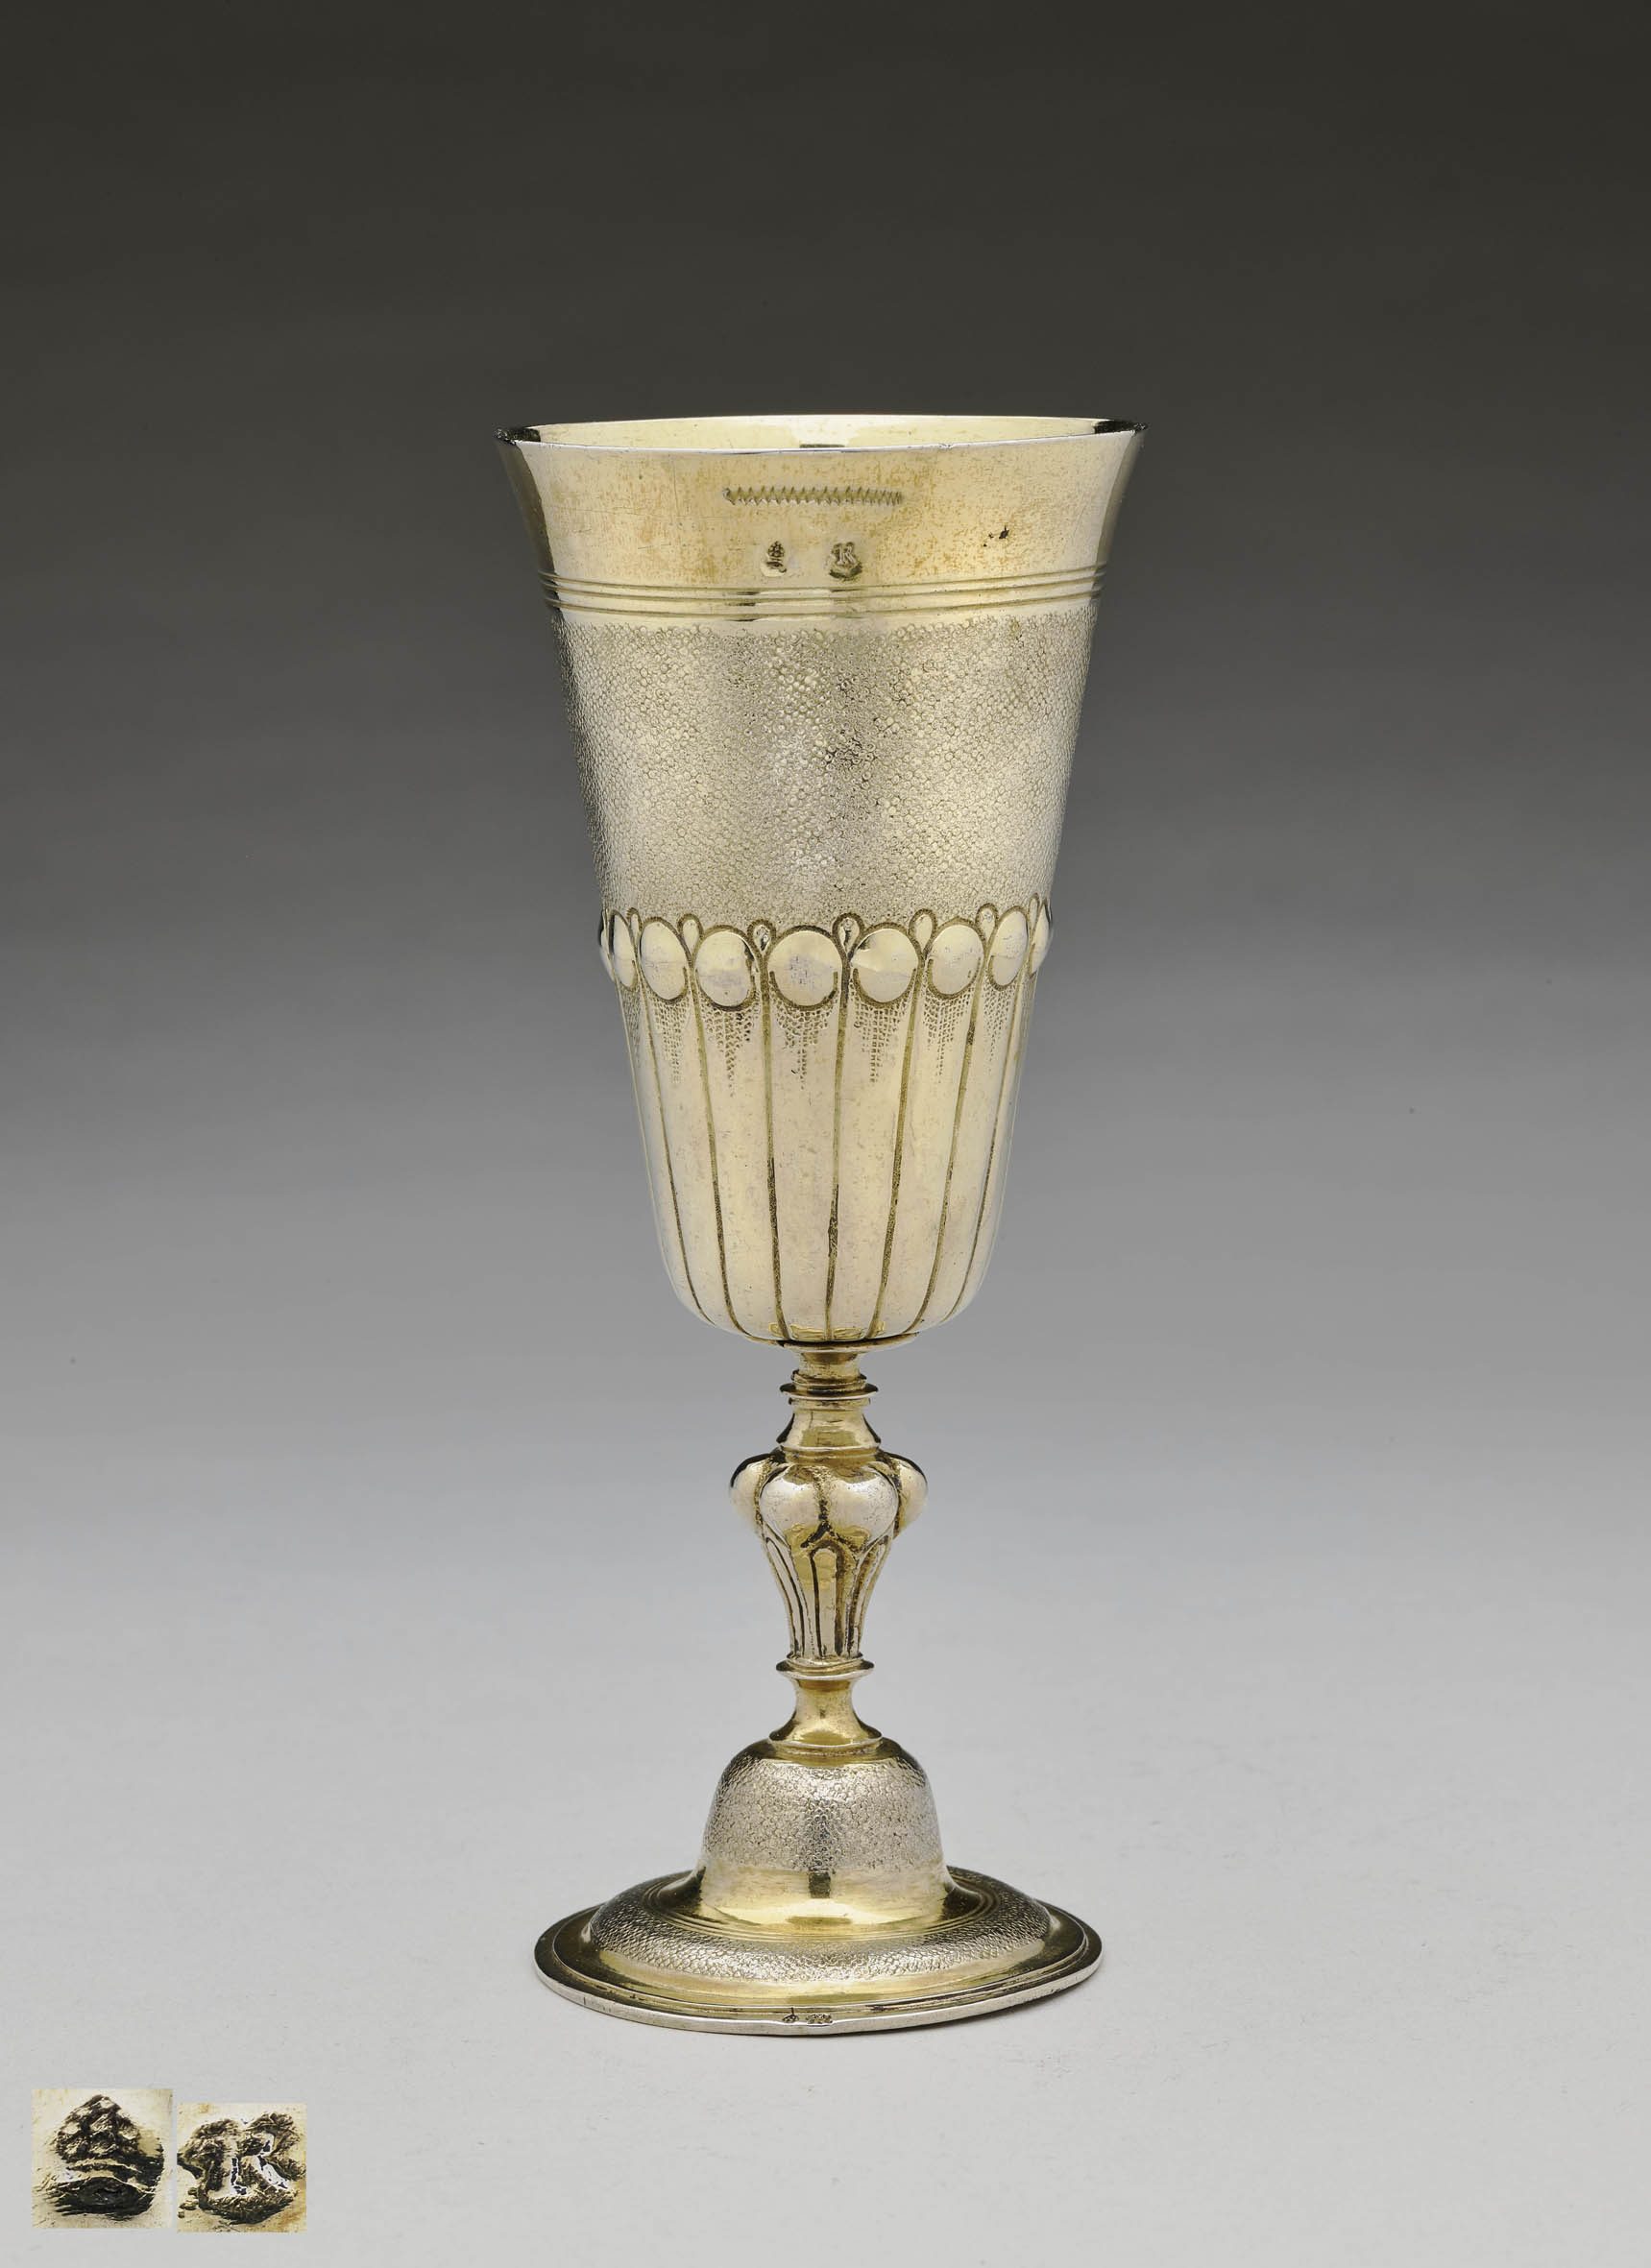 Standing cup silver-gilt, Augsburg 17th c.